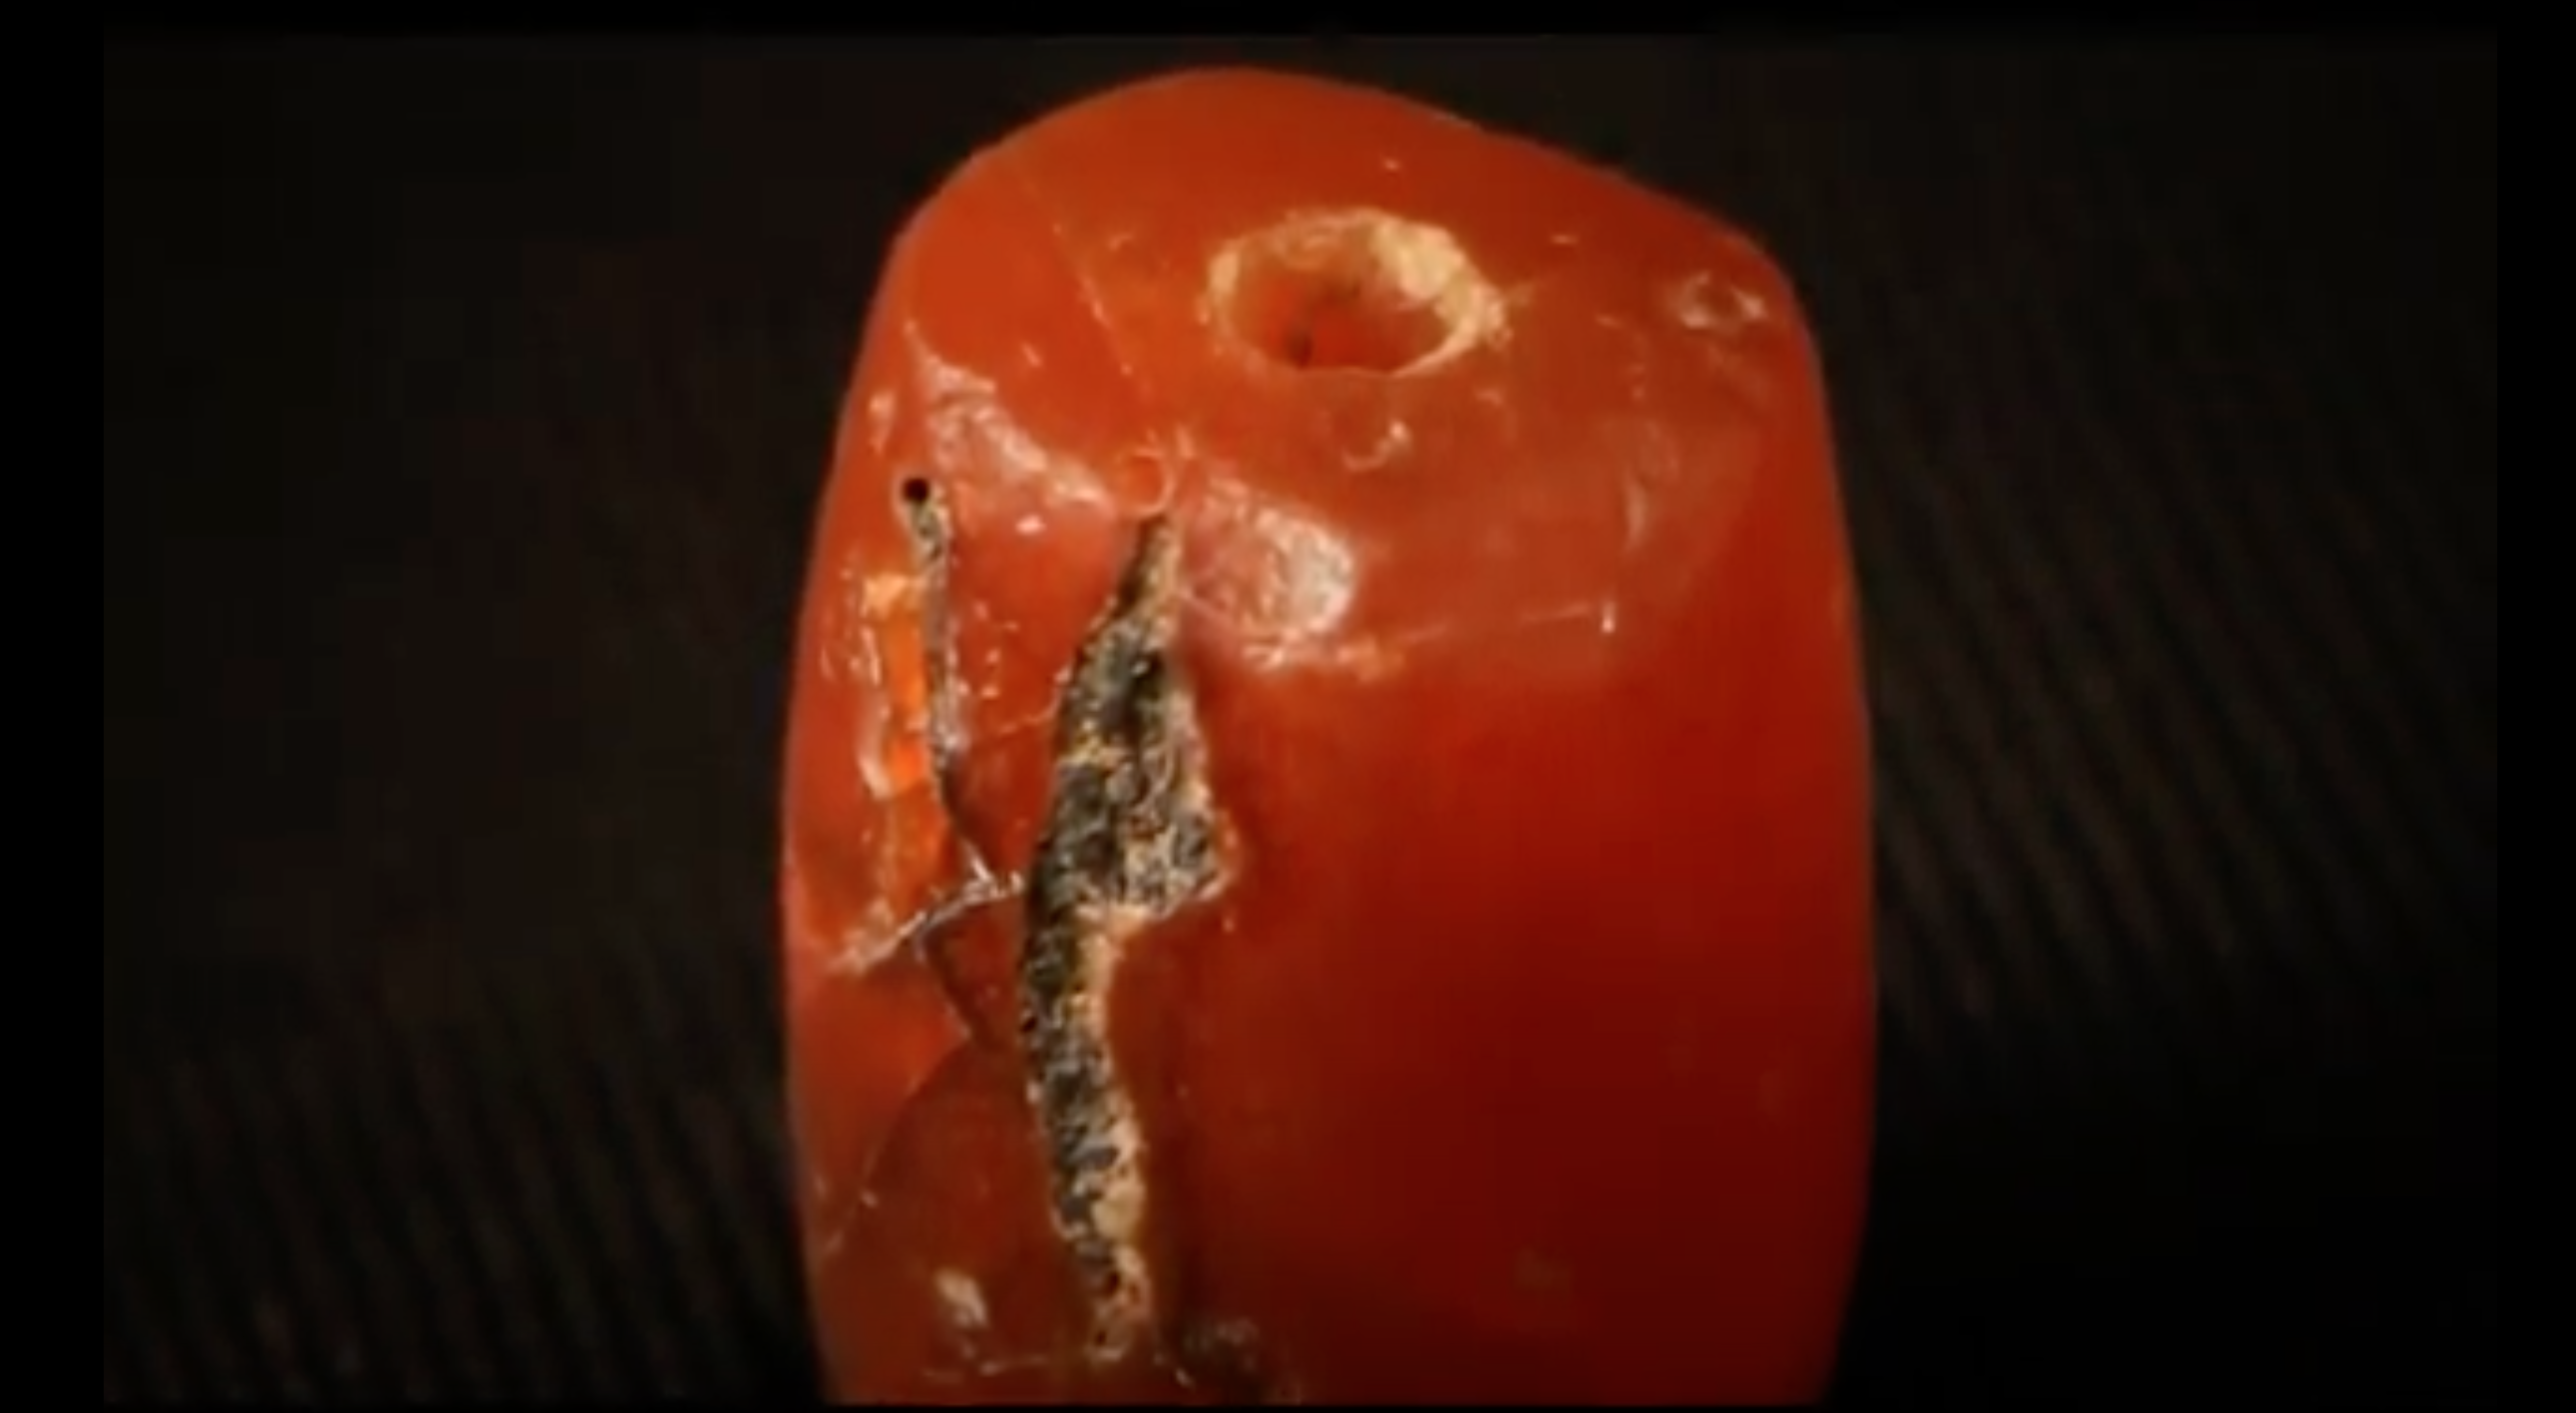 This red carnelian bead did not originate in the Virgin Islands. (Screenshot from the Charlotte Amalie Saladoid Excavation documentary)